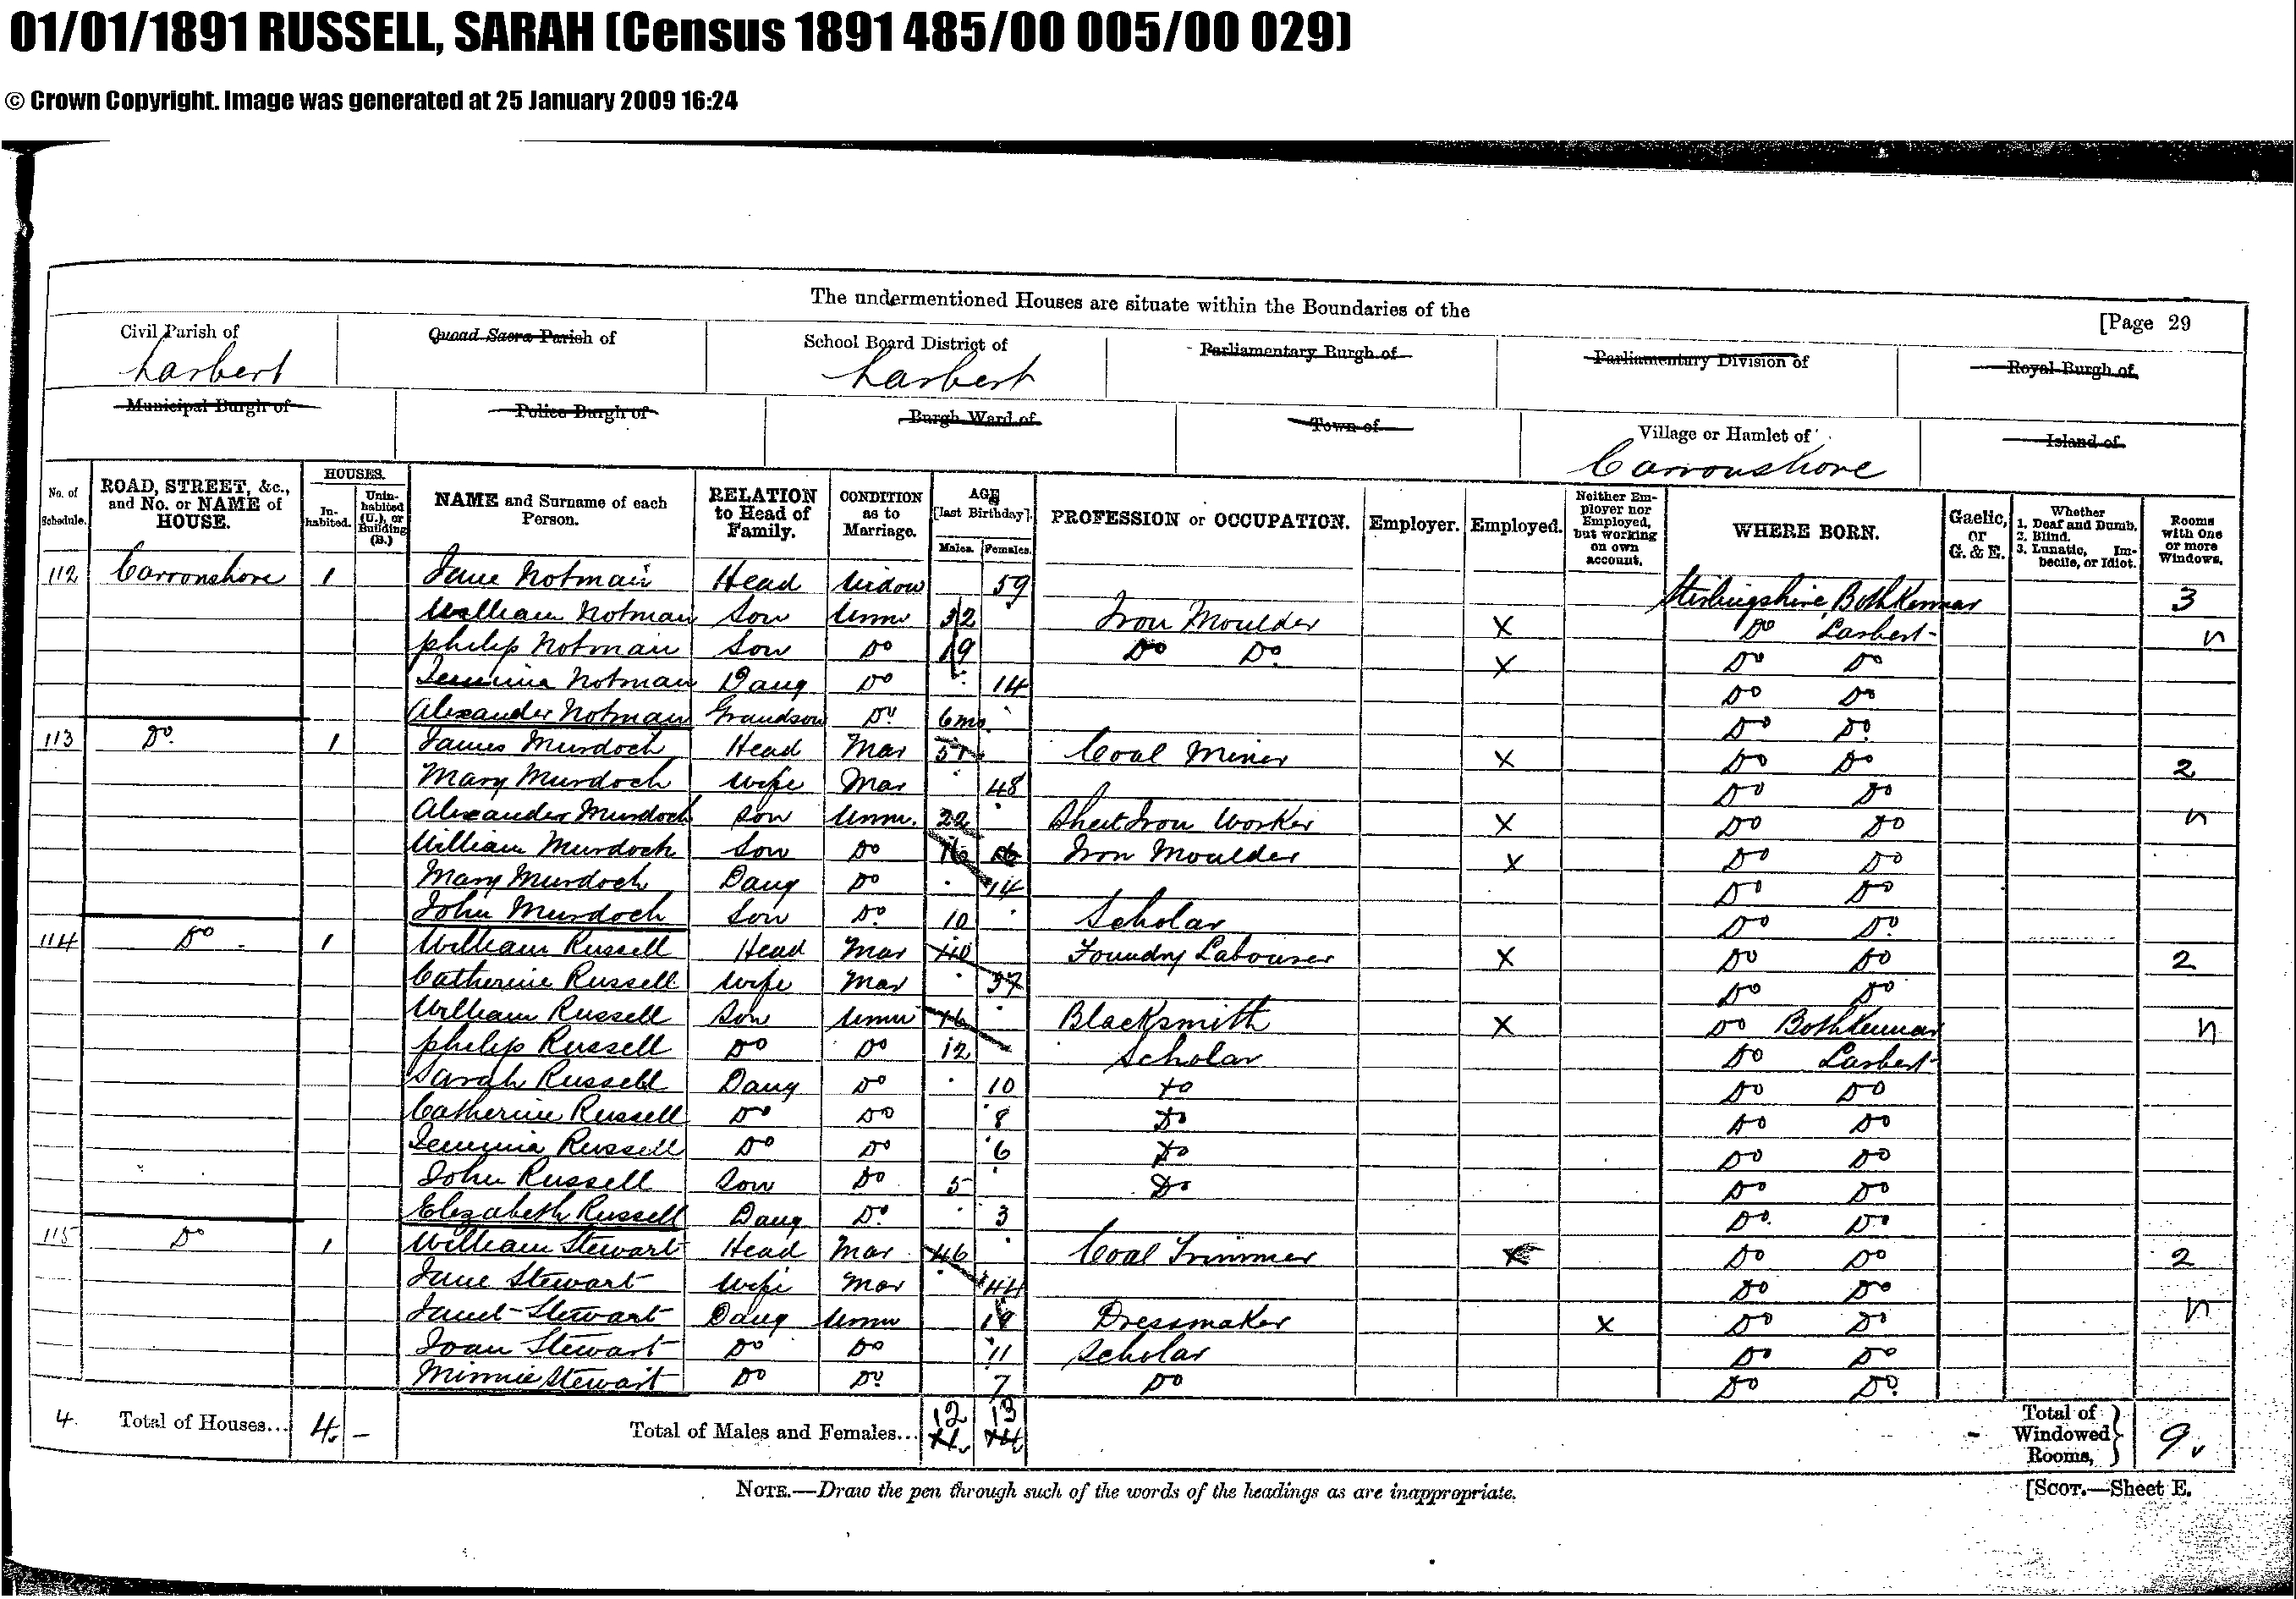 Census 1891 NOTMAN & RUSSELL Families, April 5, 1891, Linked To: <a href='i932.html' >Catherine Bain Watson</a>